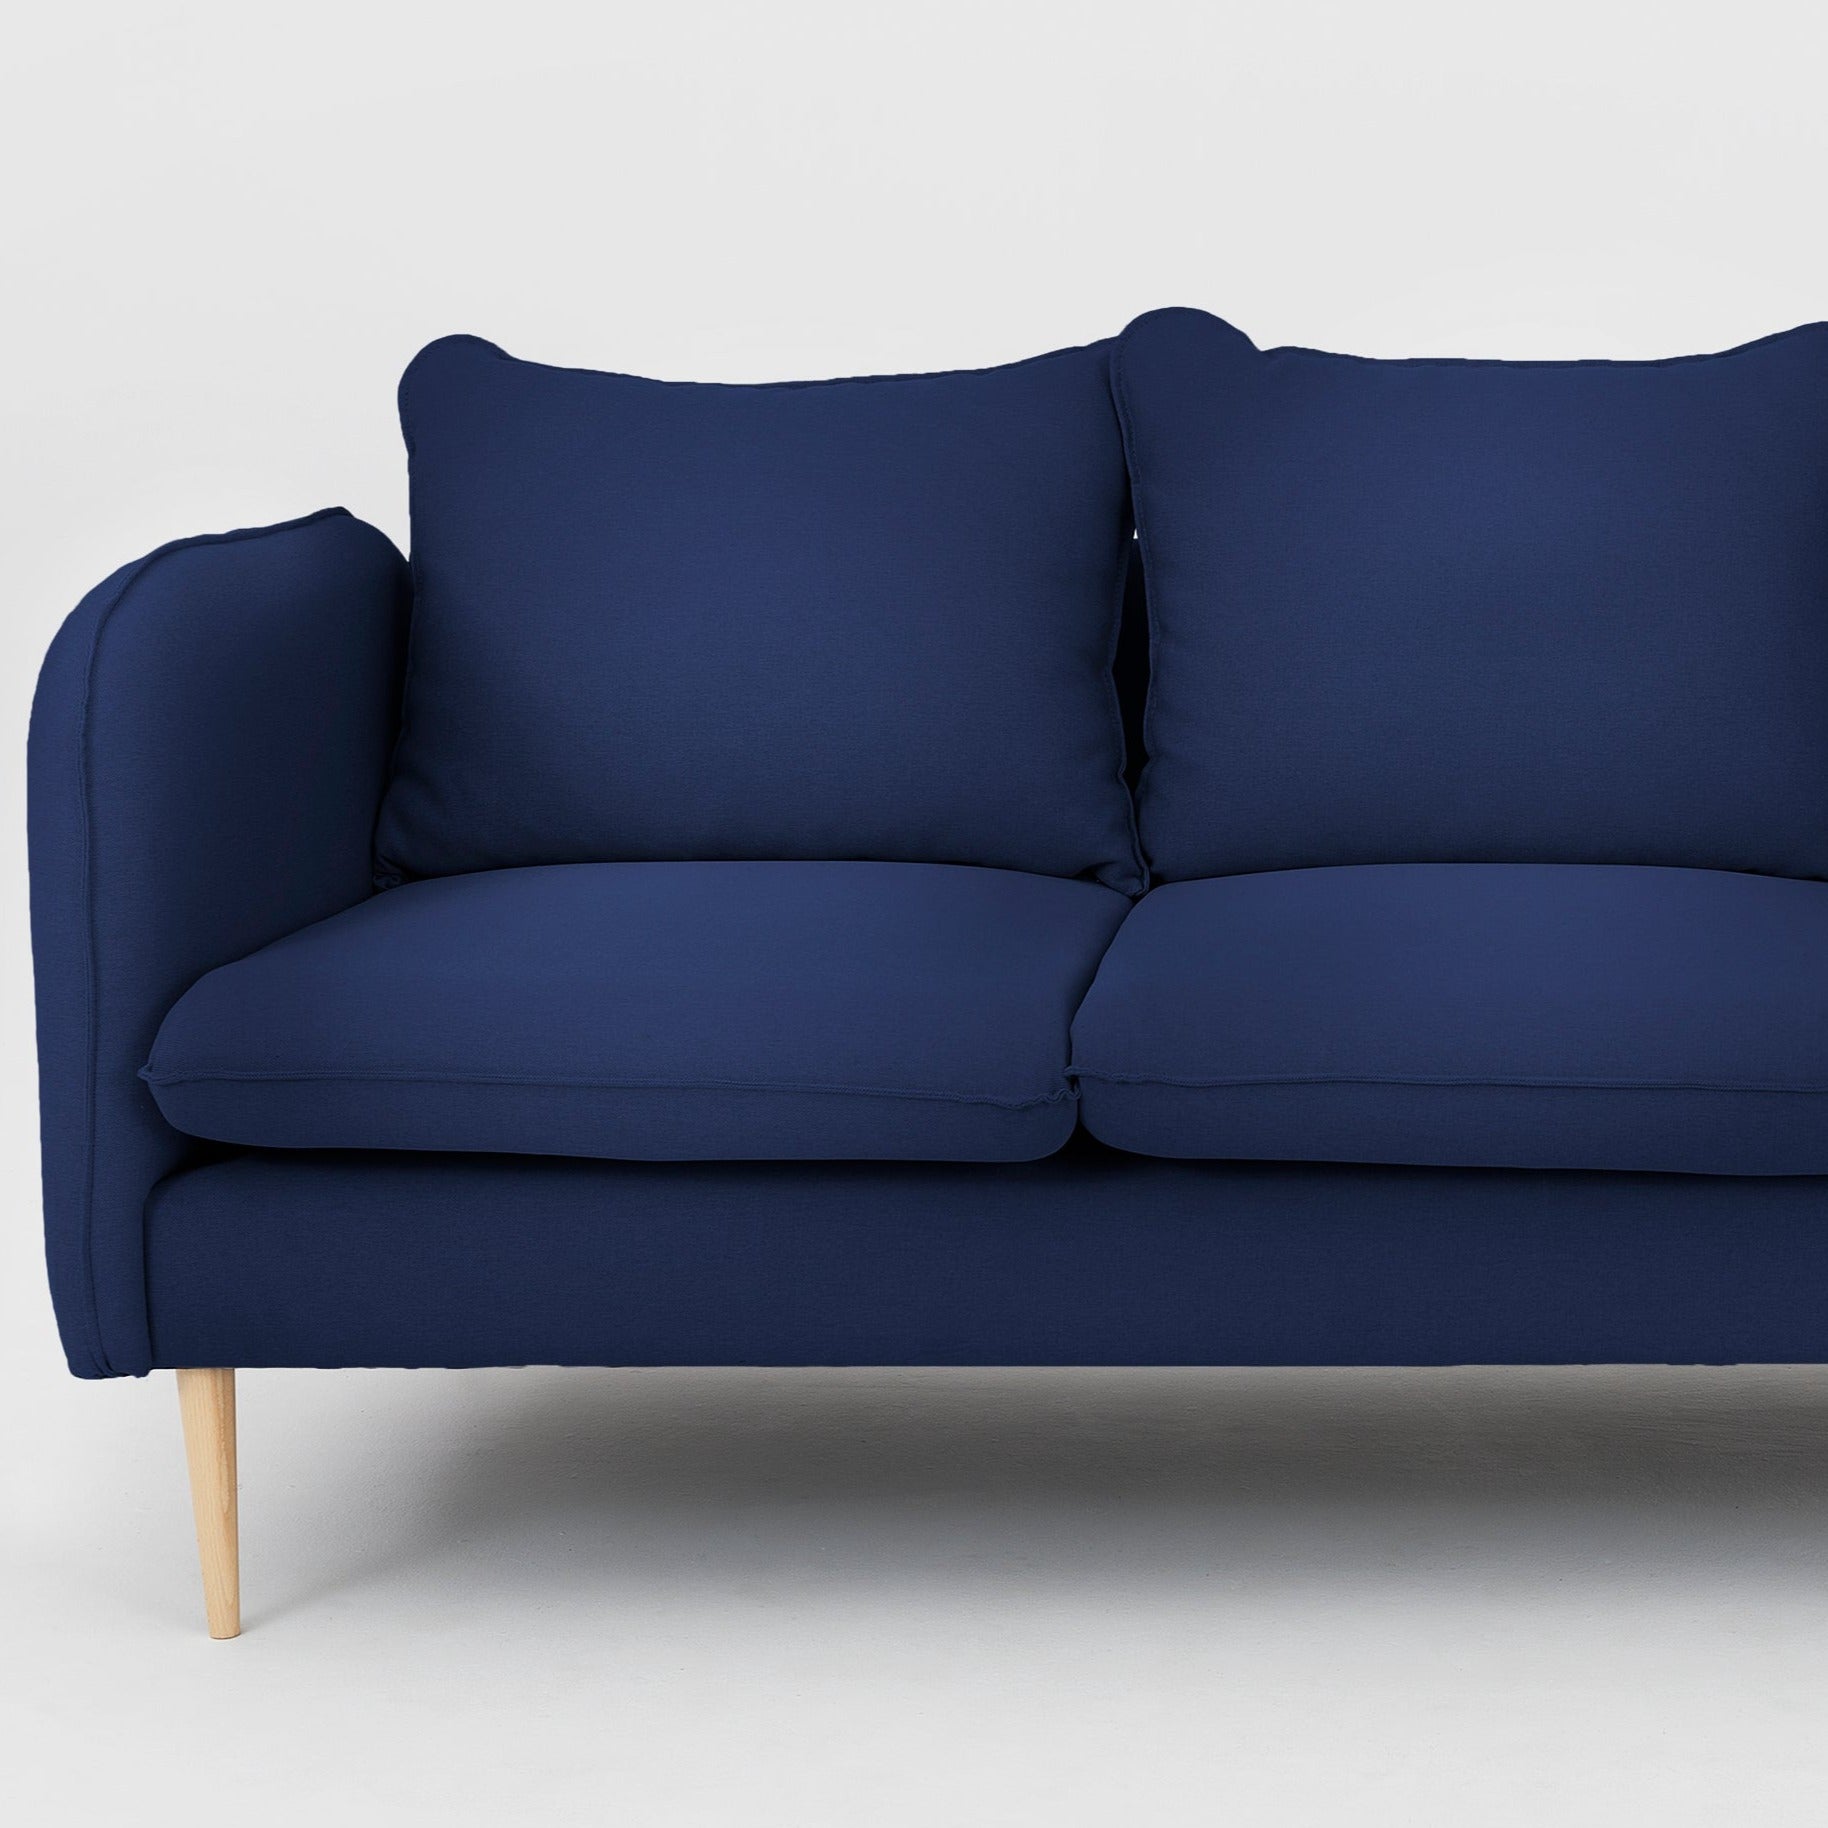 POSH WOOD Sofa 3 Seaters upholstery colour blue interior view